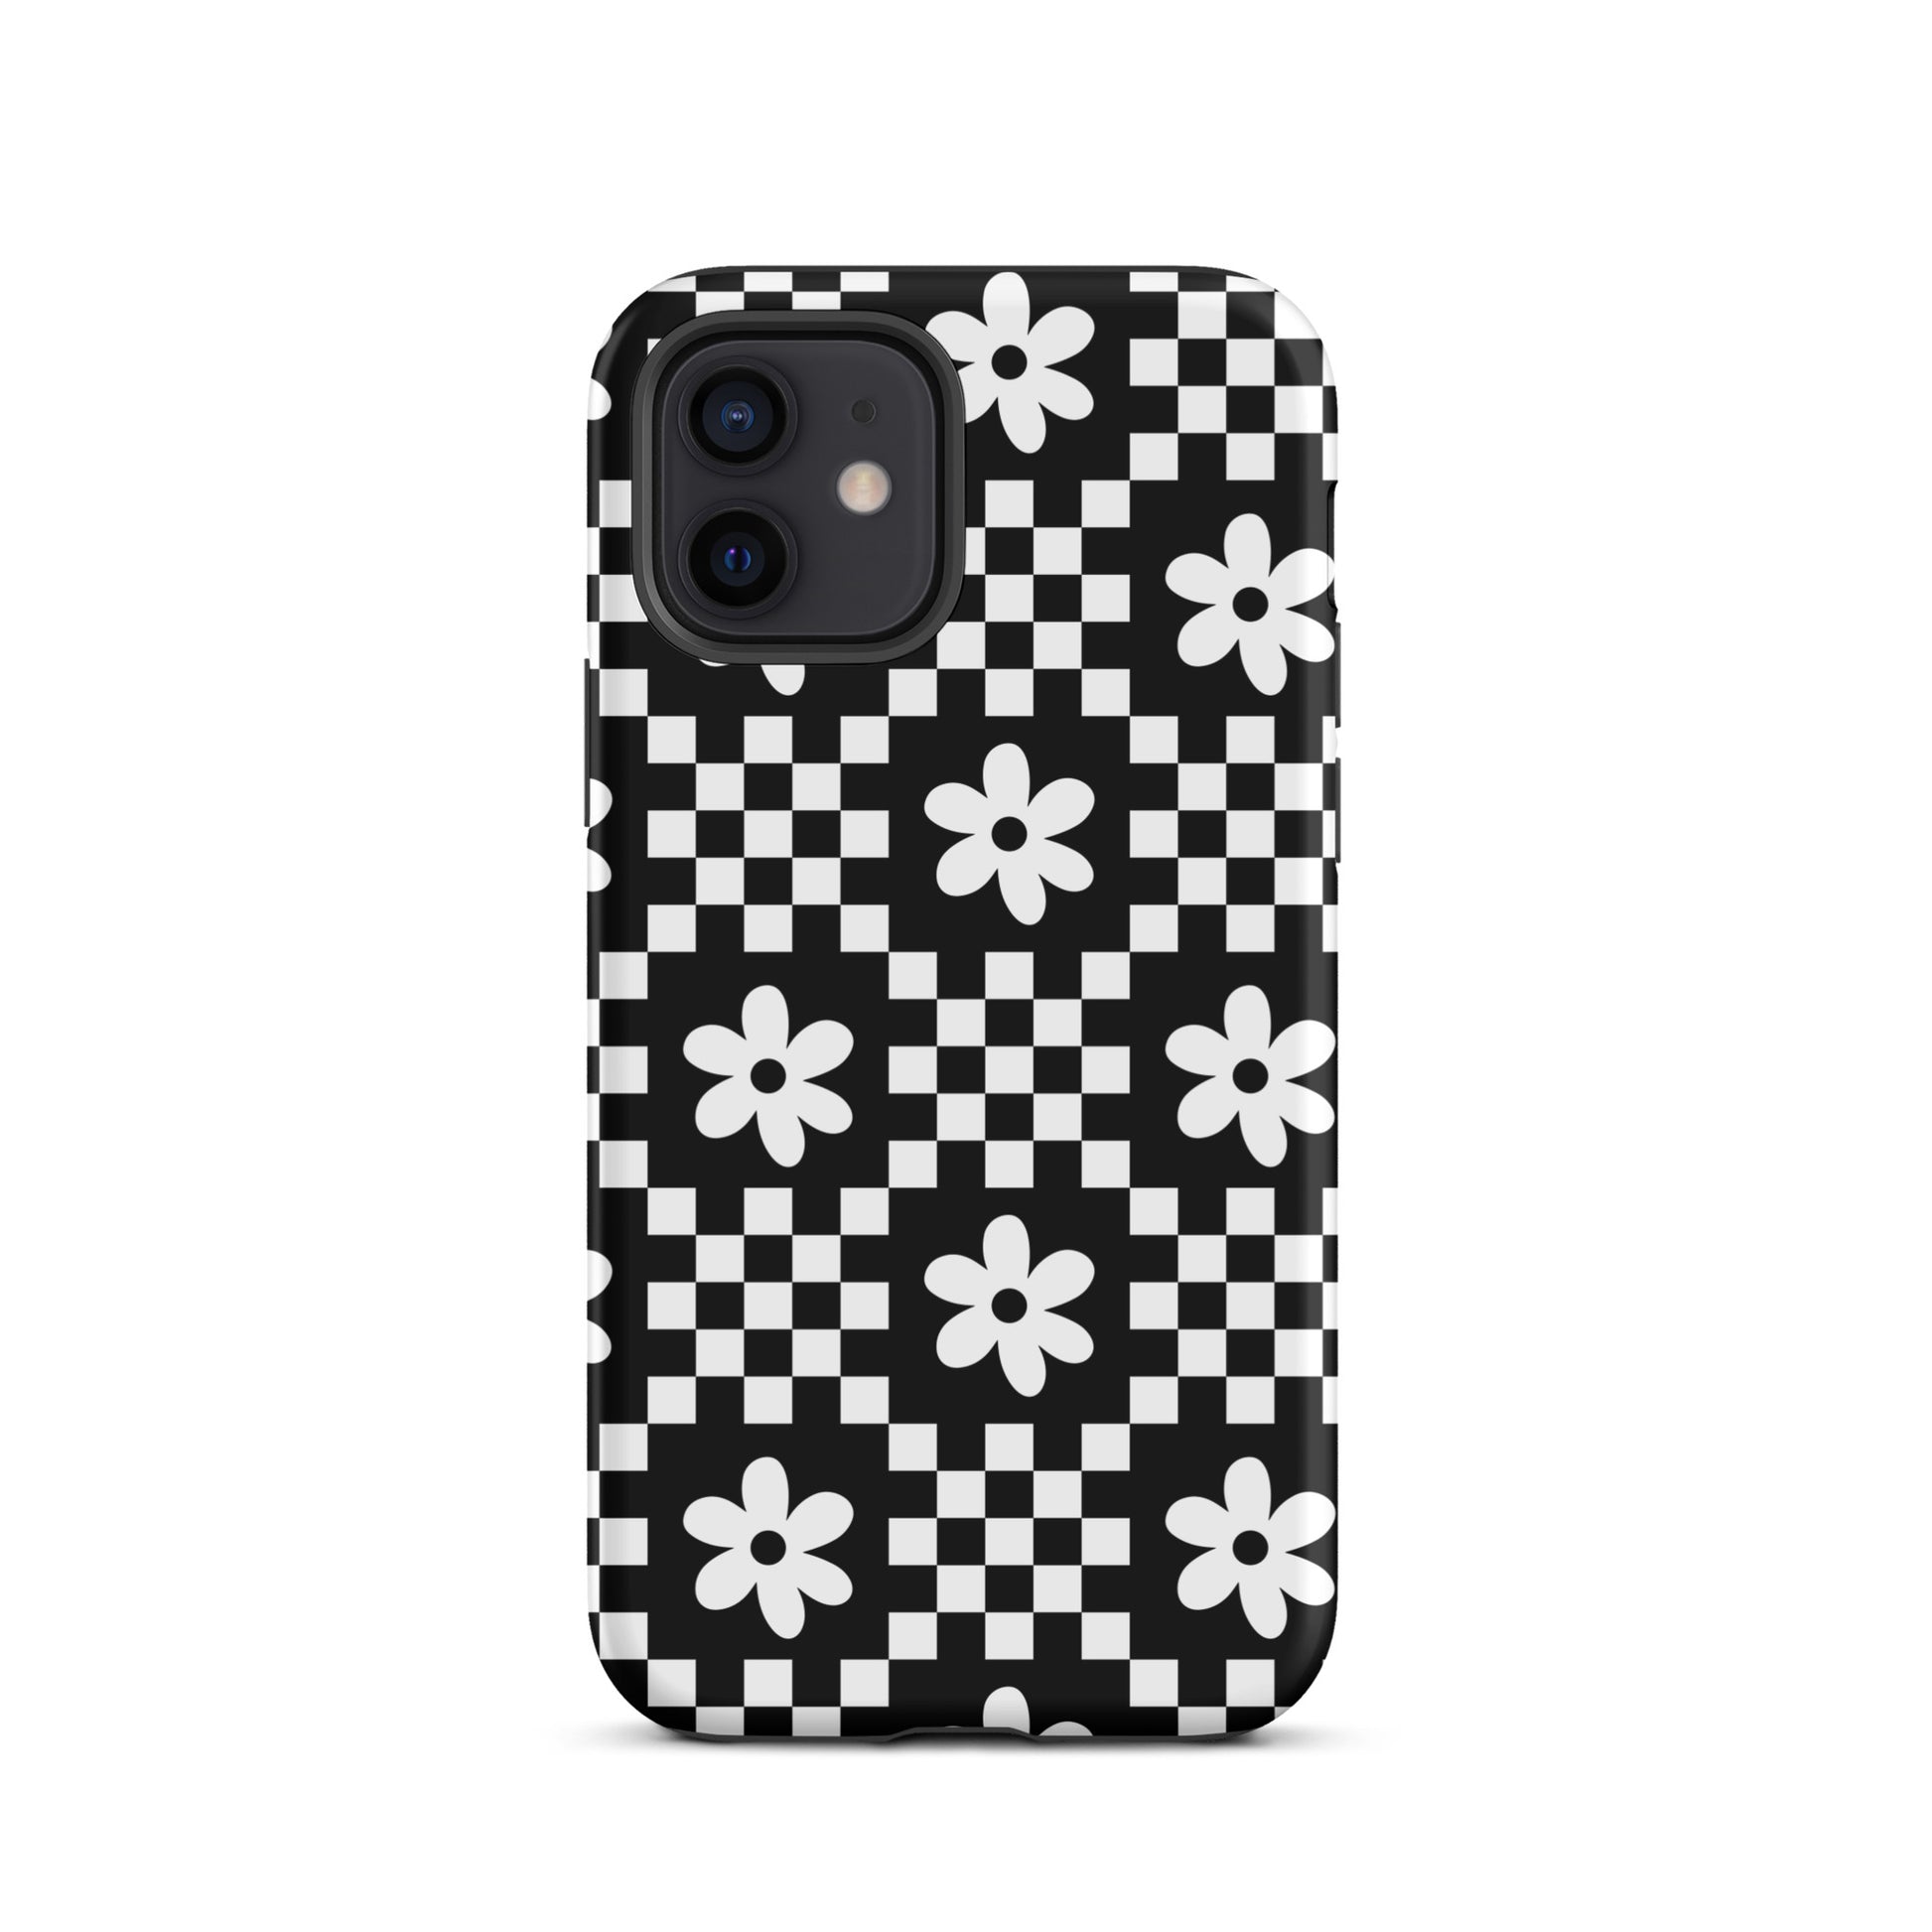 Checkerboard Daisy iPhone Case iPhone 12 Matte